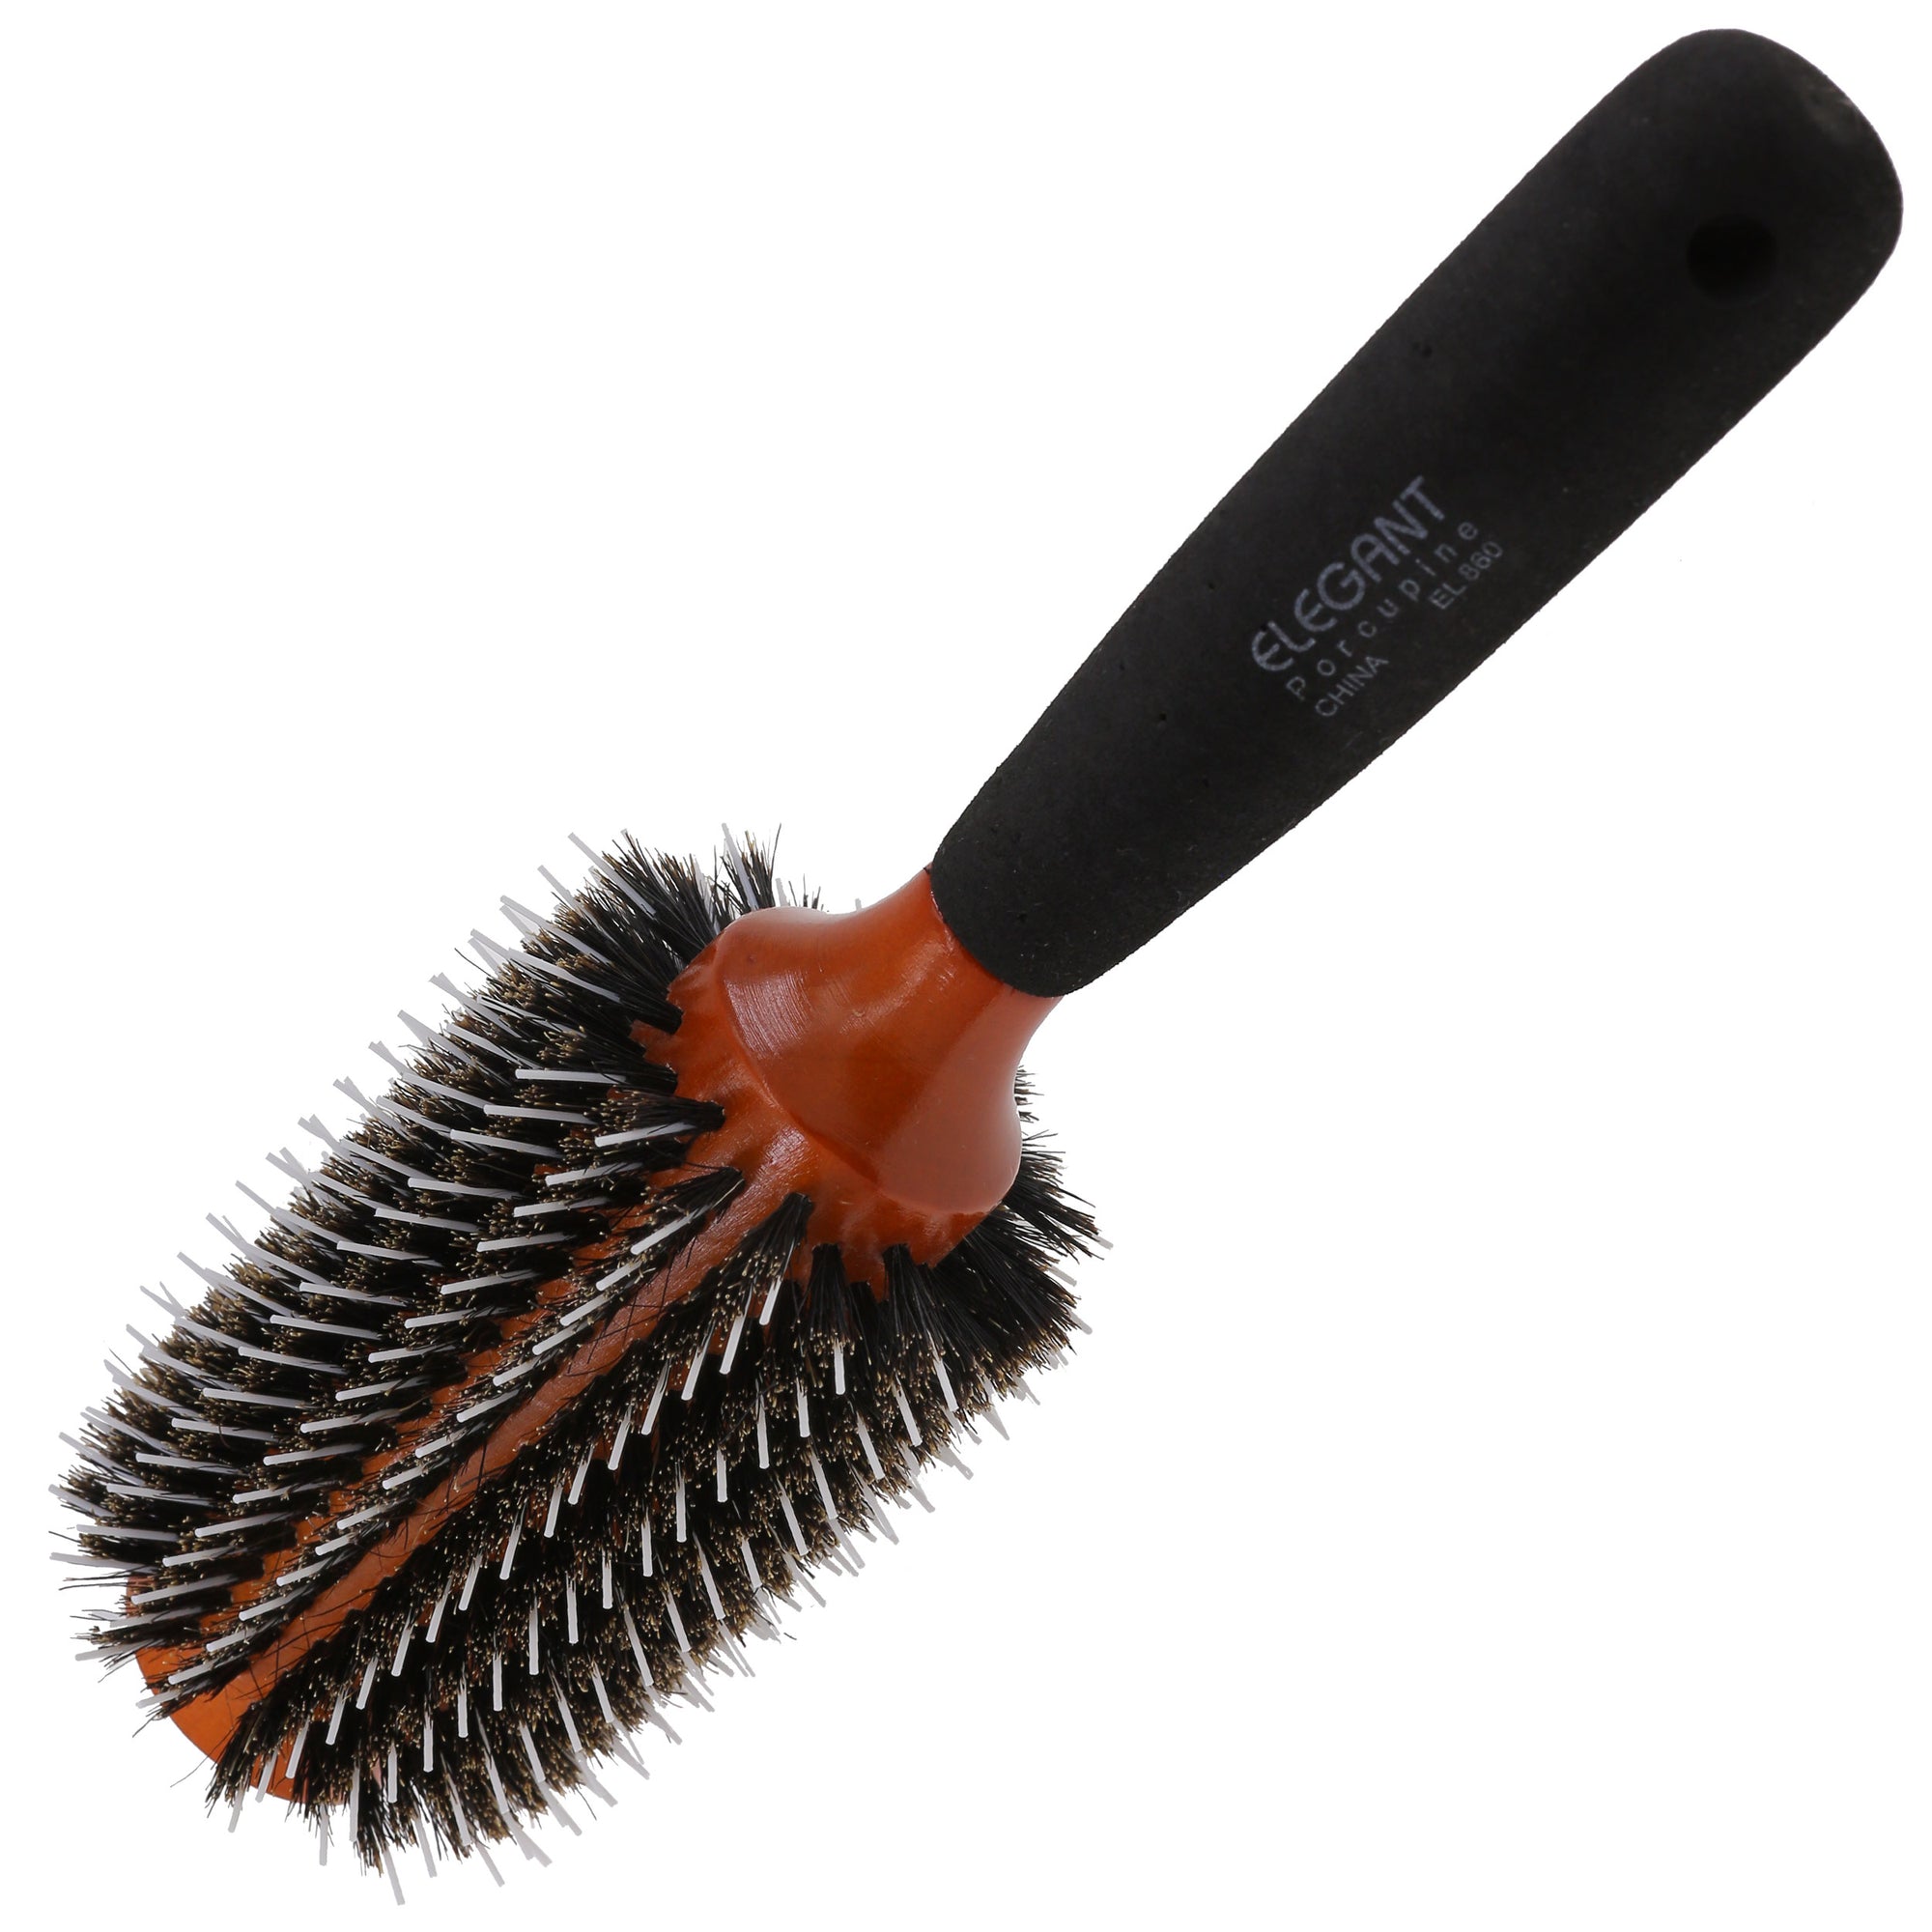 2.75" Nylon and Natural Bristle Round Hair Brush with Foam Handle